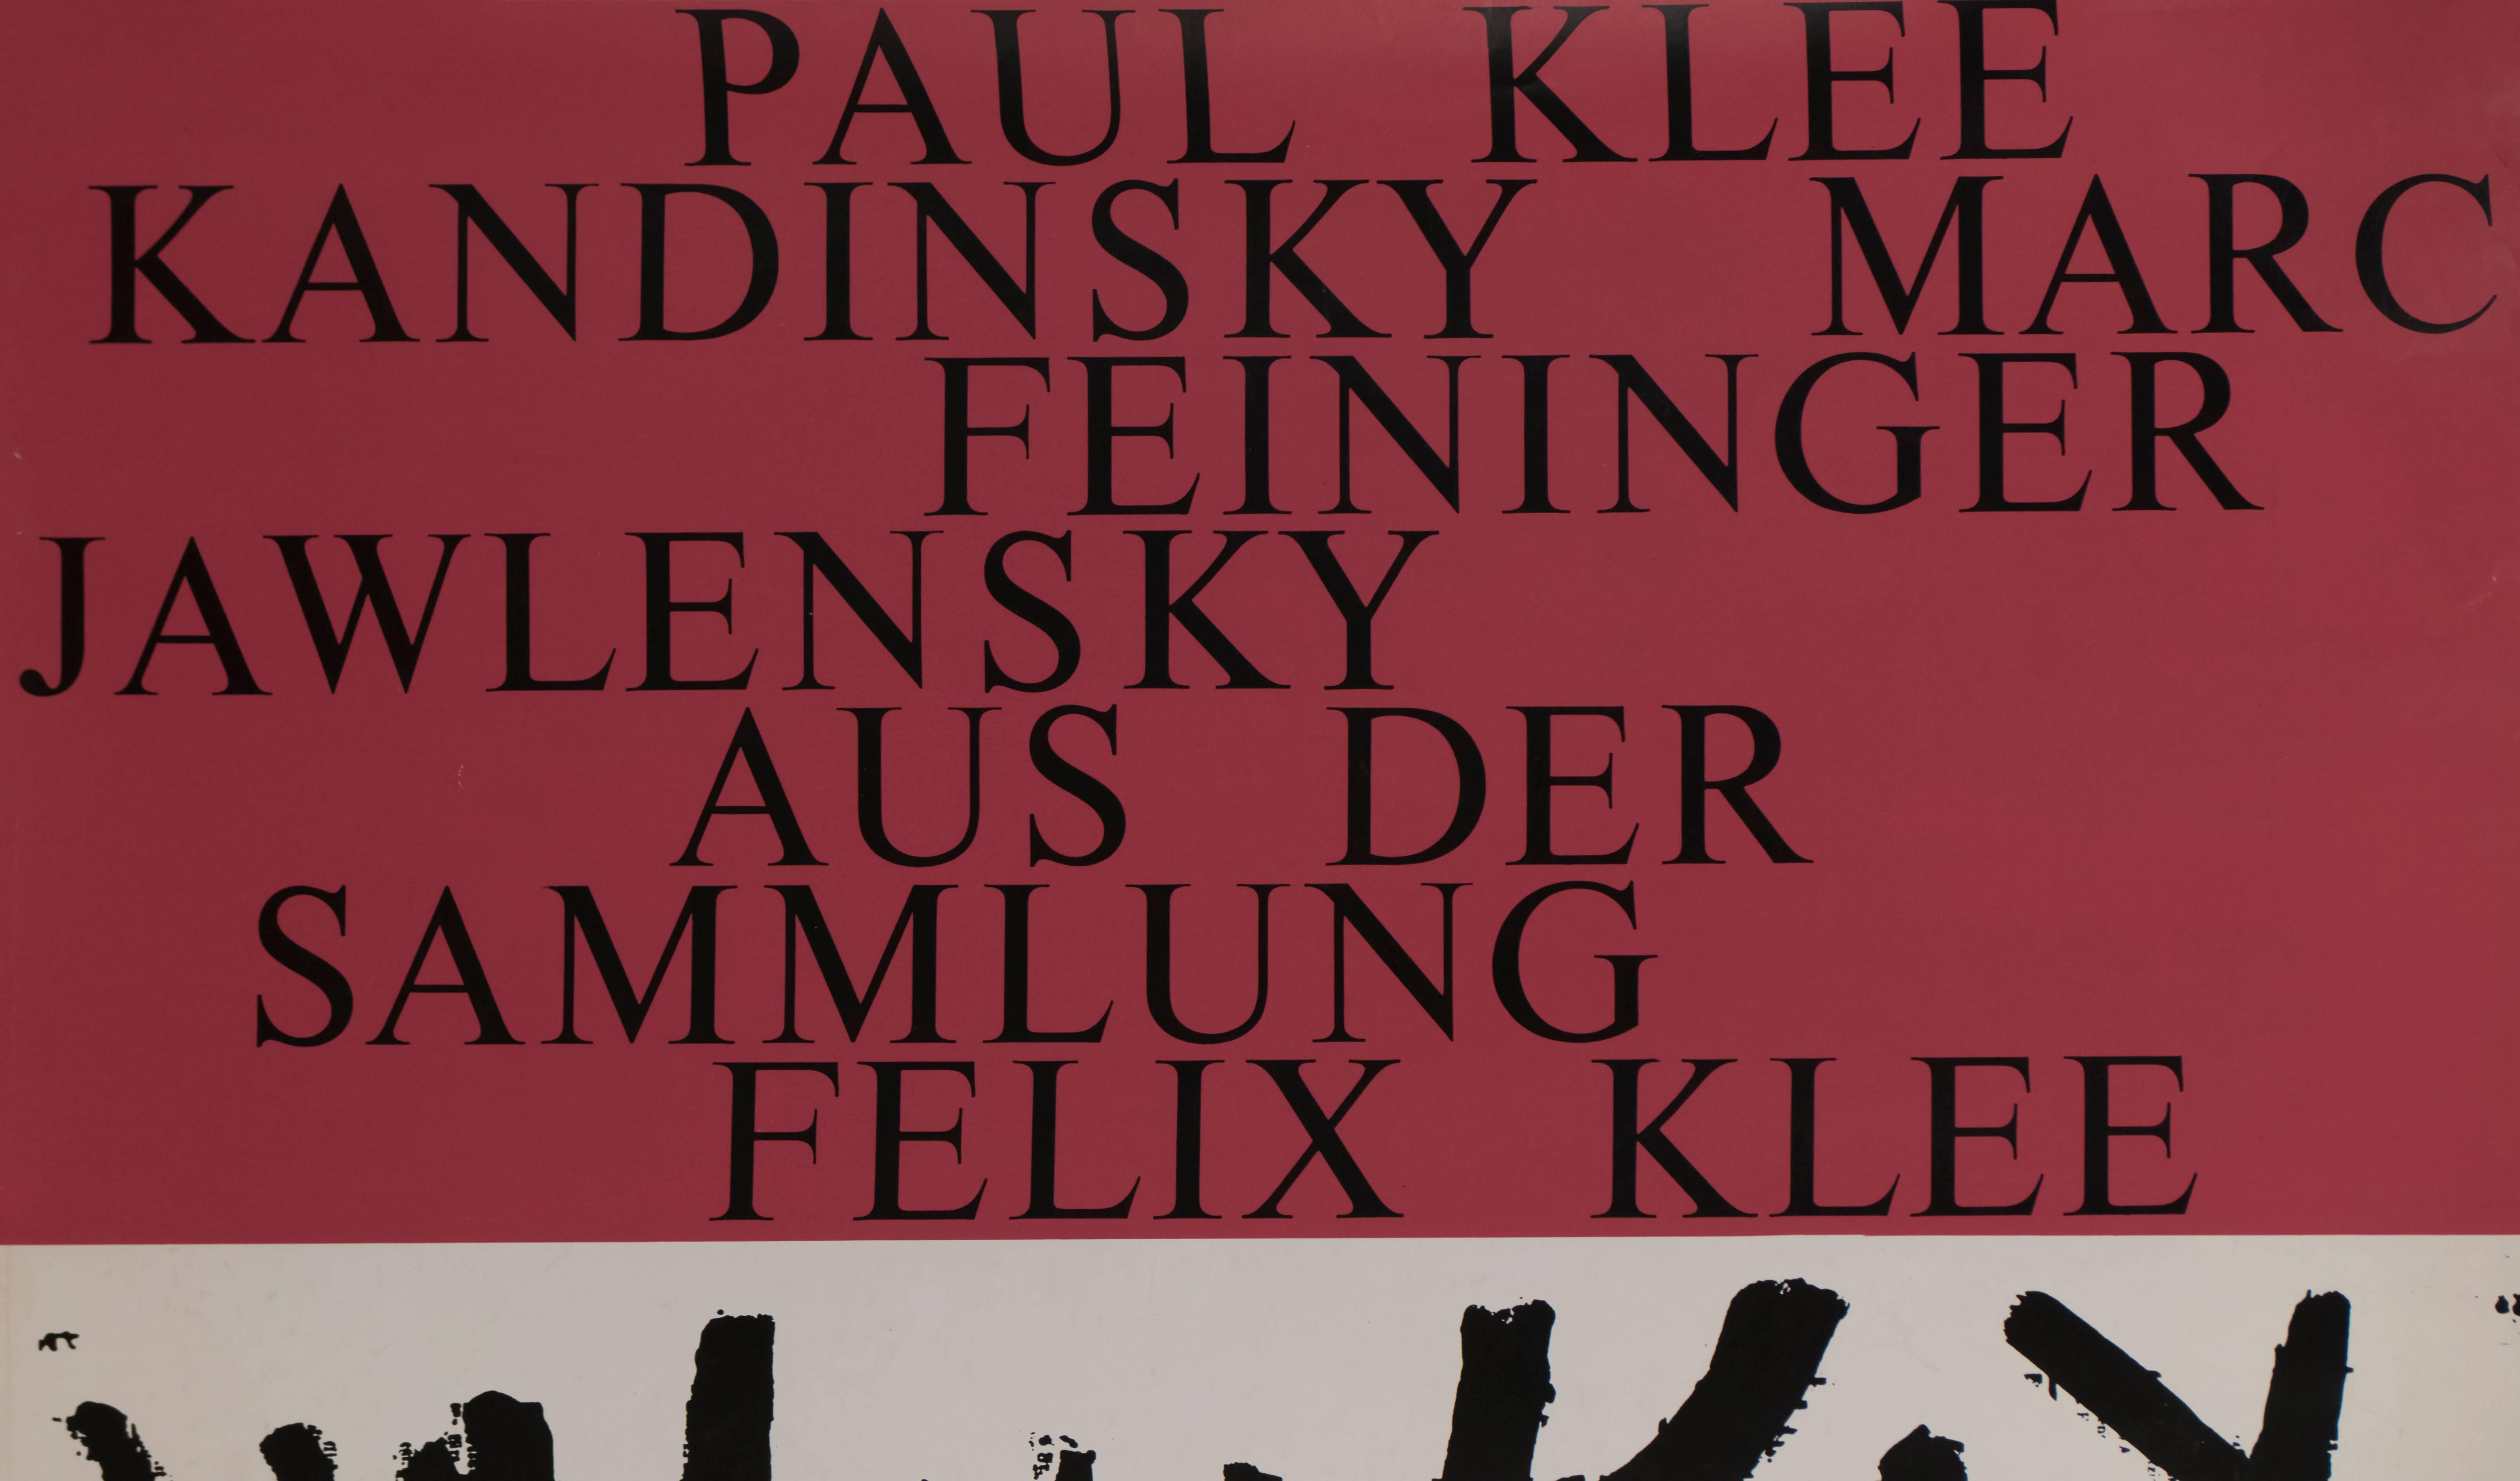 paul klee exhibition poster